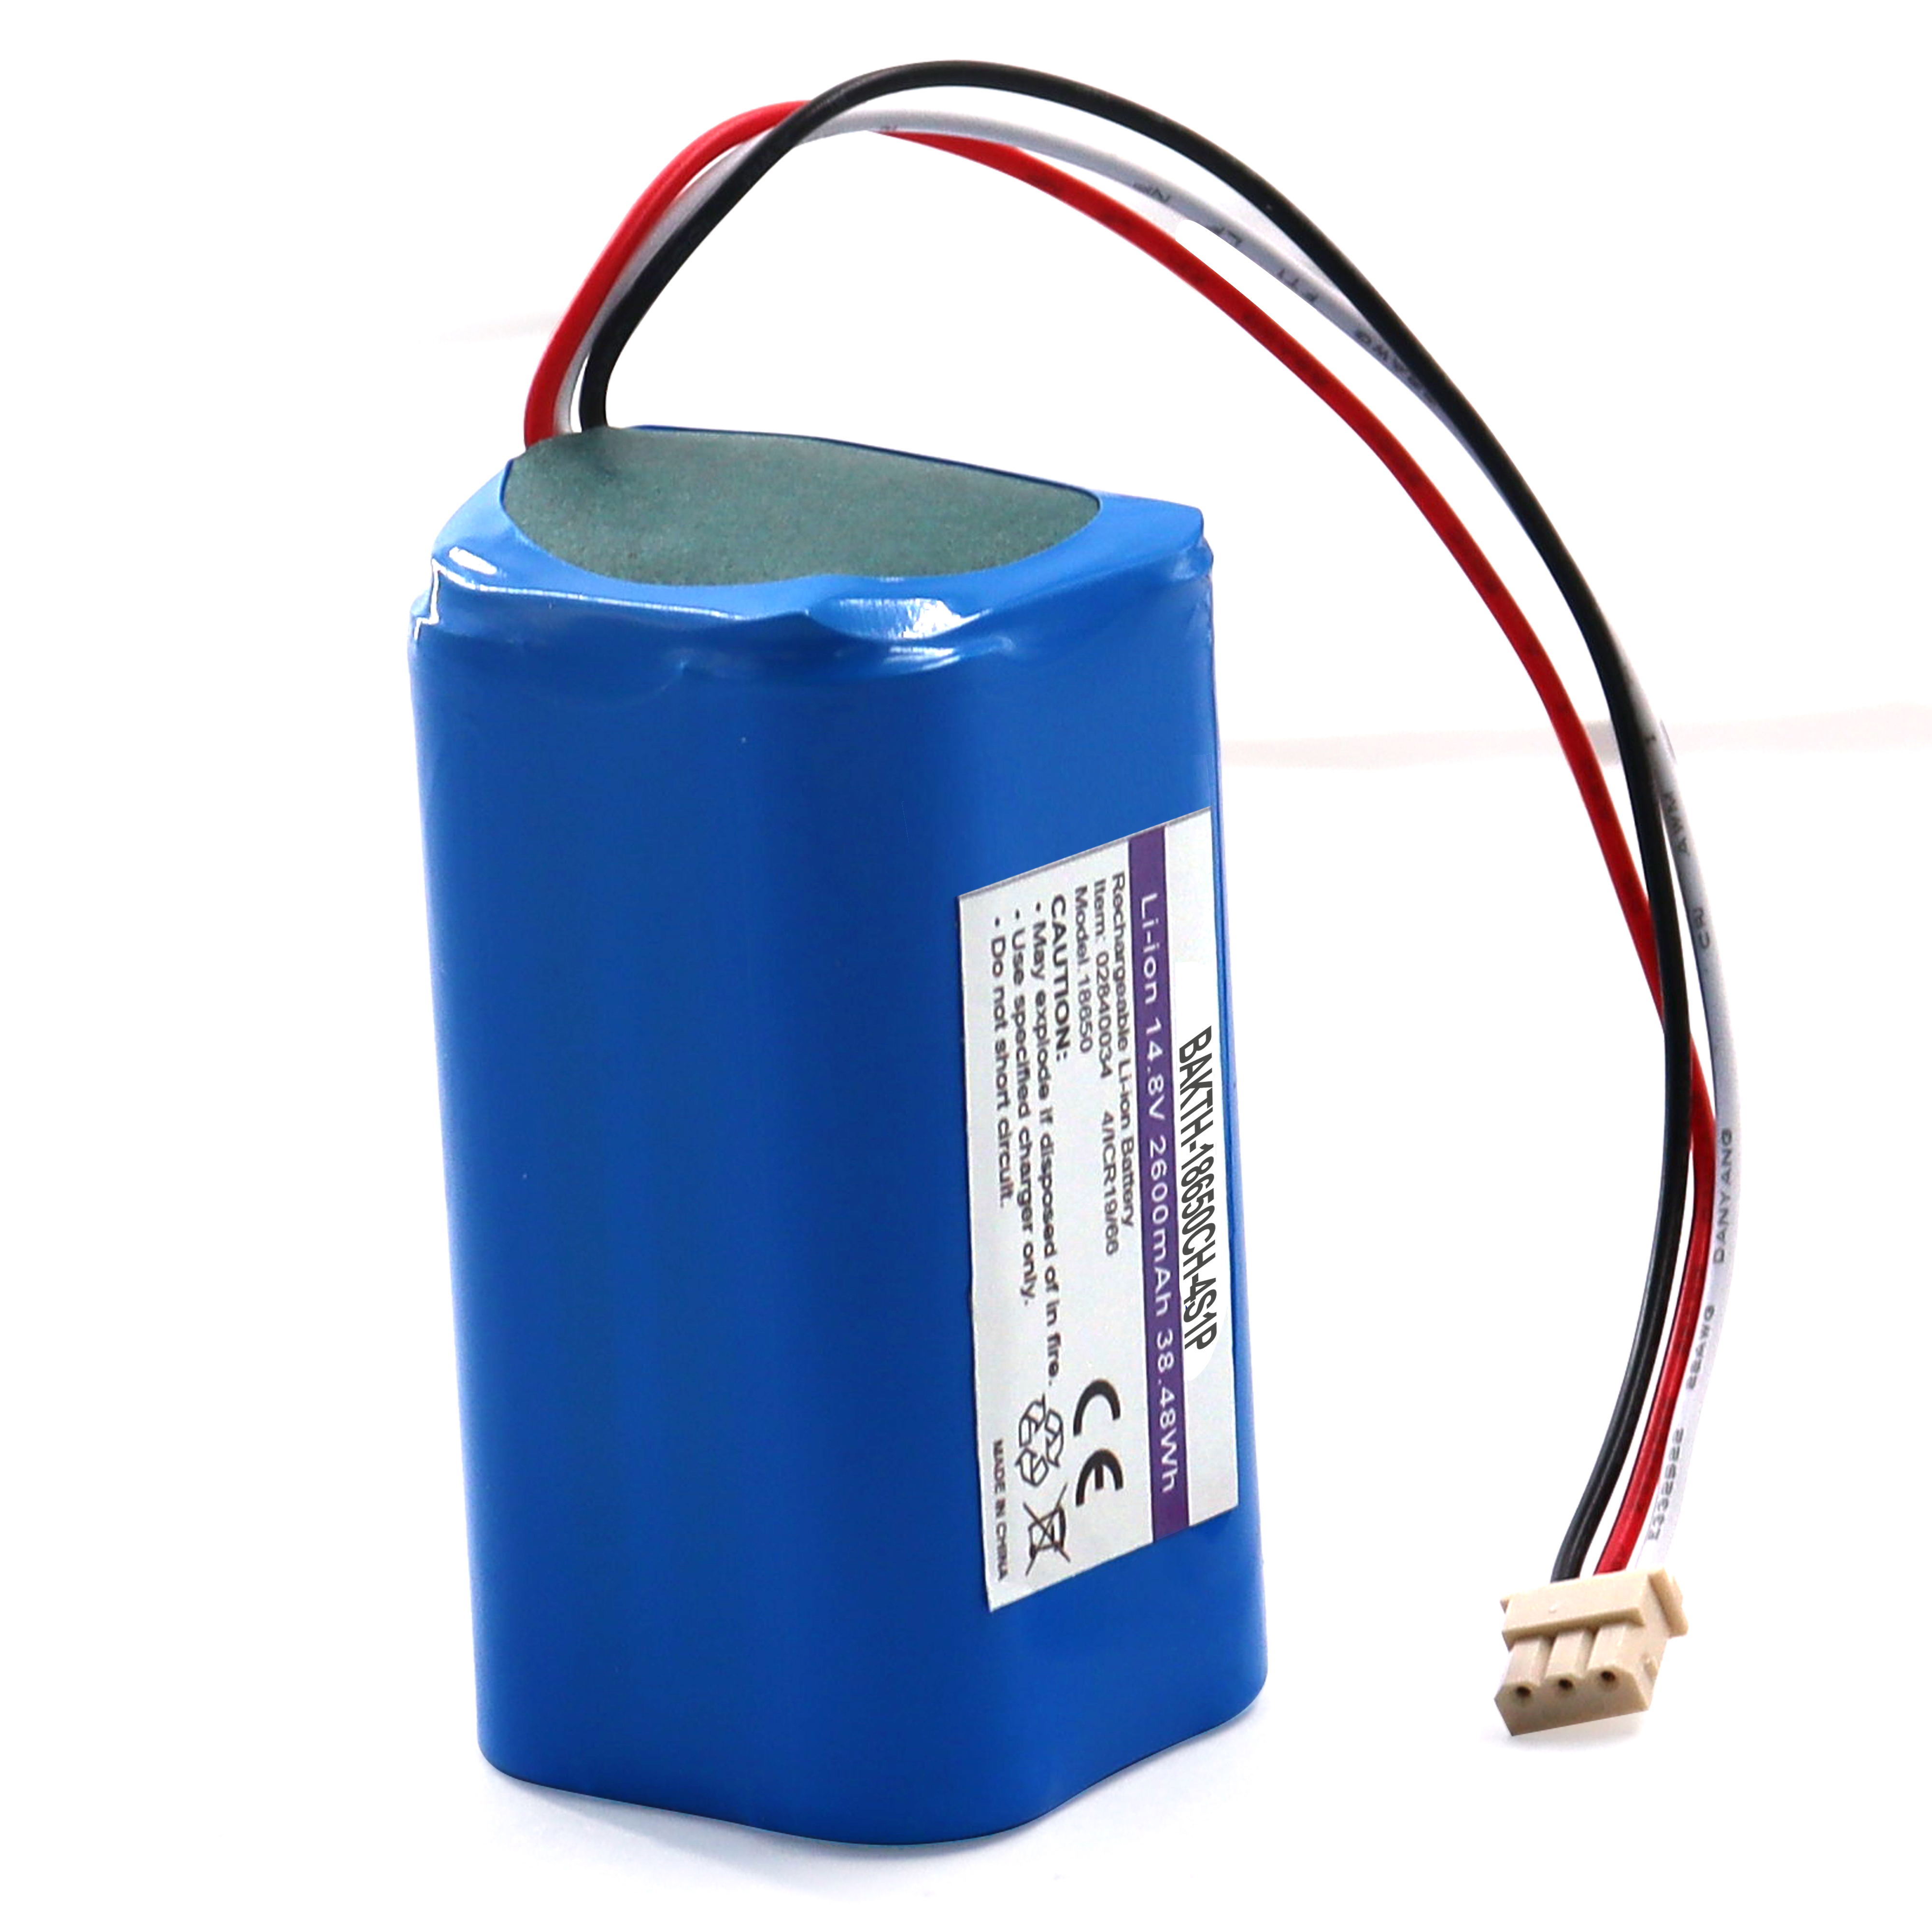 BAKTH-18650-4S1P 14.8V 2600mAh Factory Customized Lithium ion Battery Pack Rechargeable Battery Pack for Electric Devices